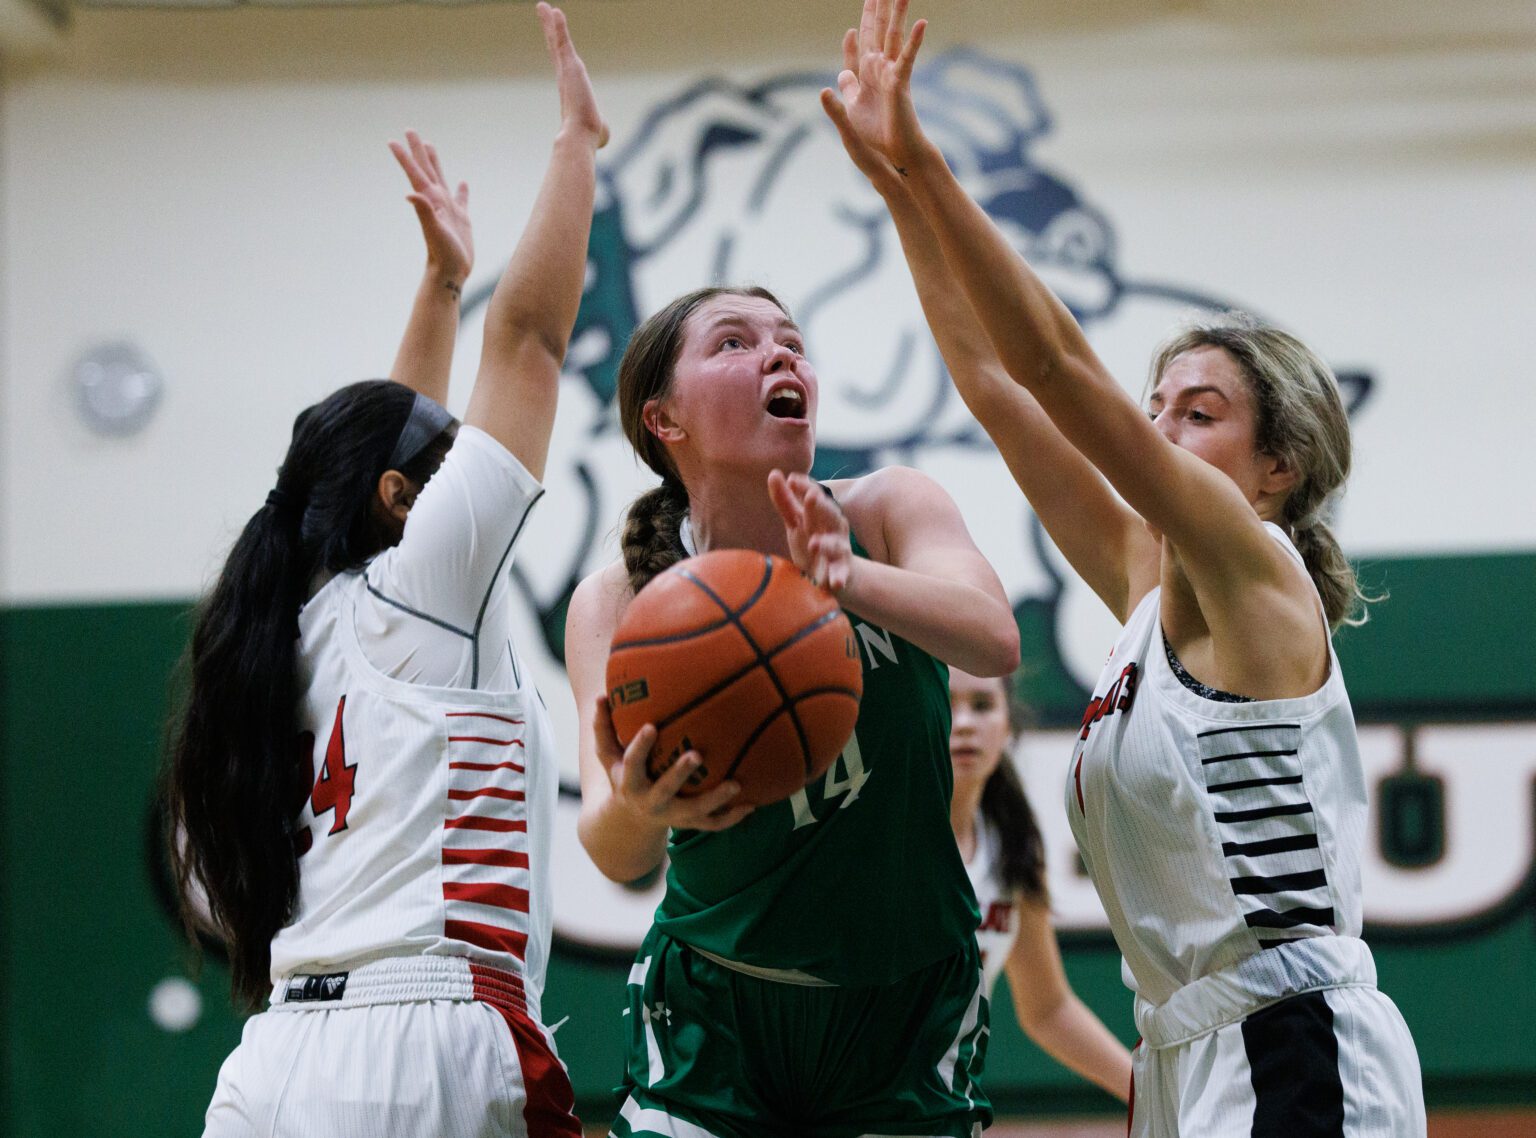 Lynden's Haylee Koetje passes through two Archbishop Murphy defenders for a shot at the basket. Koetje’s 14 points were not enough to overcome Archbishop's offense as the Lions lost 43-38 at Mount Vernon High School on Feb. 15.